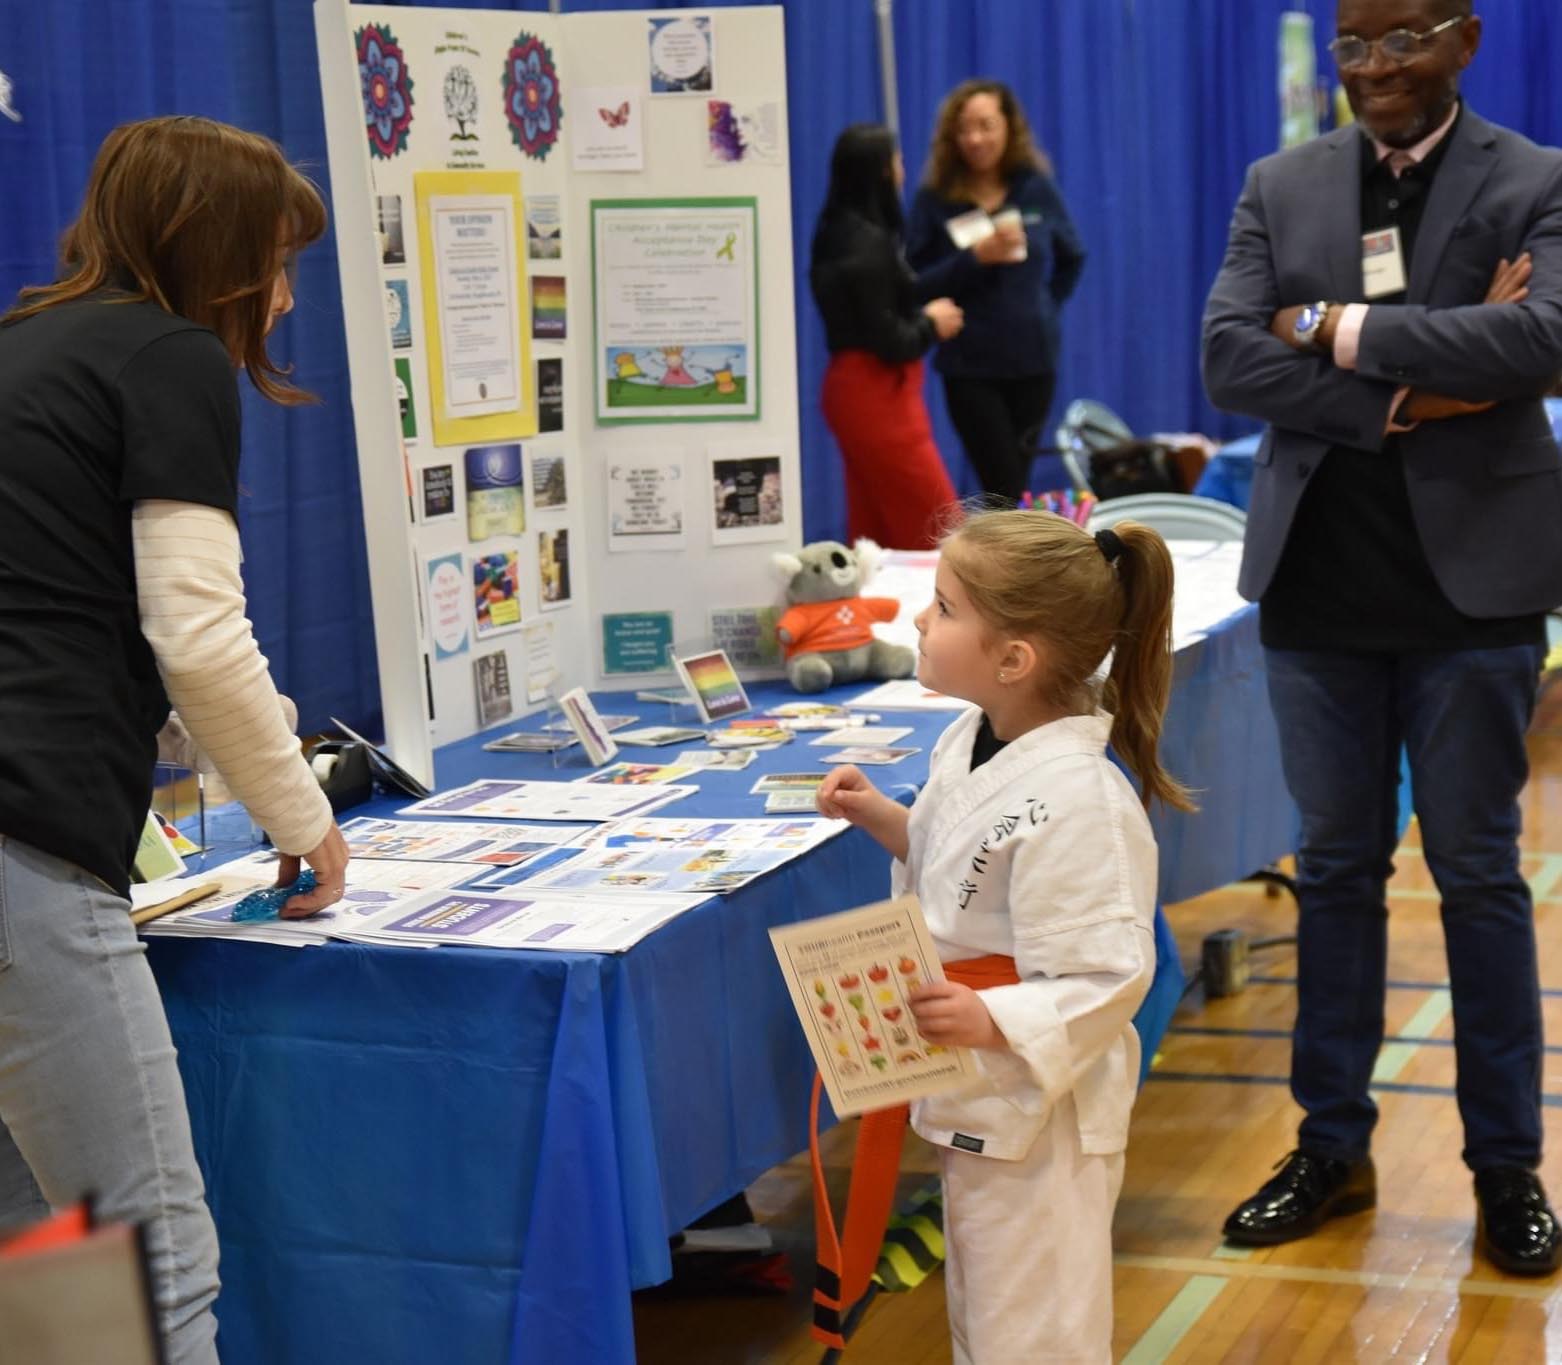 On April 29th, 2023 Dutchess County Department of Behavioral & Community Health hosted their 2nd Annual YOUR Health Fair at Dutchess Community College’s Falcon Hall. Dutchess County’s Children and Youth Services Coordinator, Debbie DiSanza, engages with a young person (a Karate master we gather) at the table about children and youth mental health services in Dutchess County.